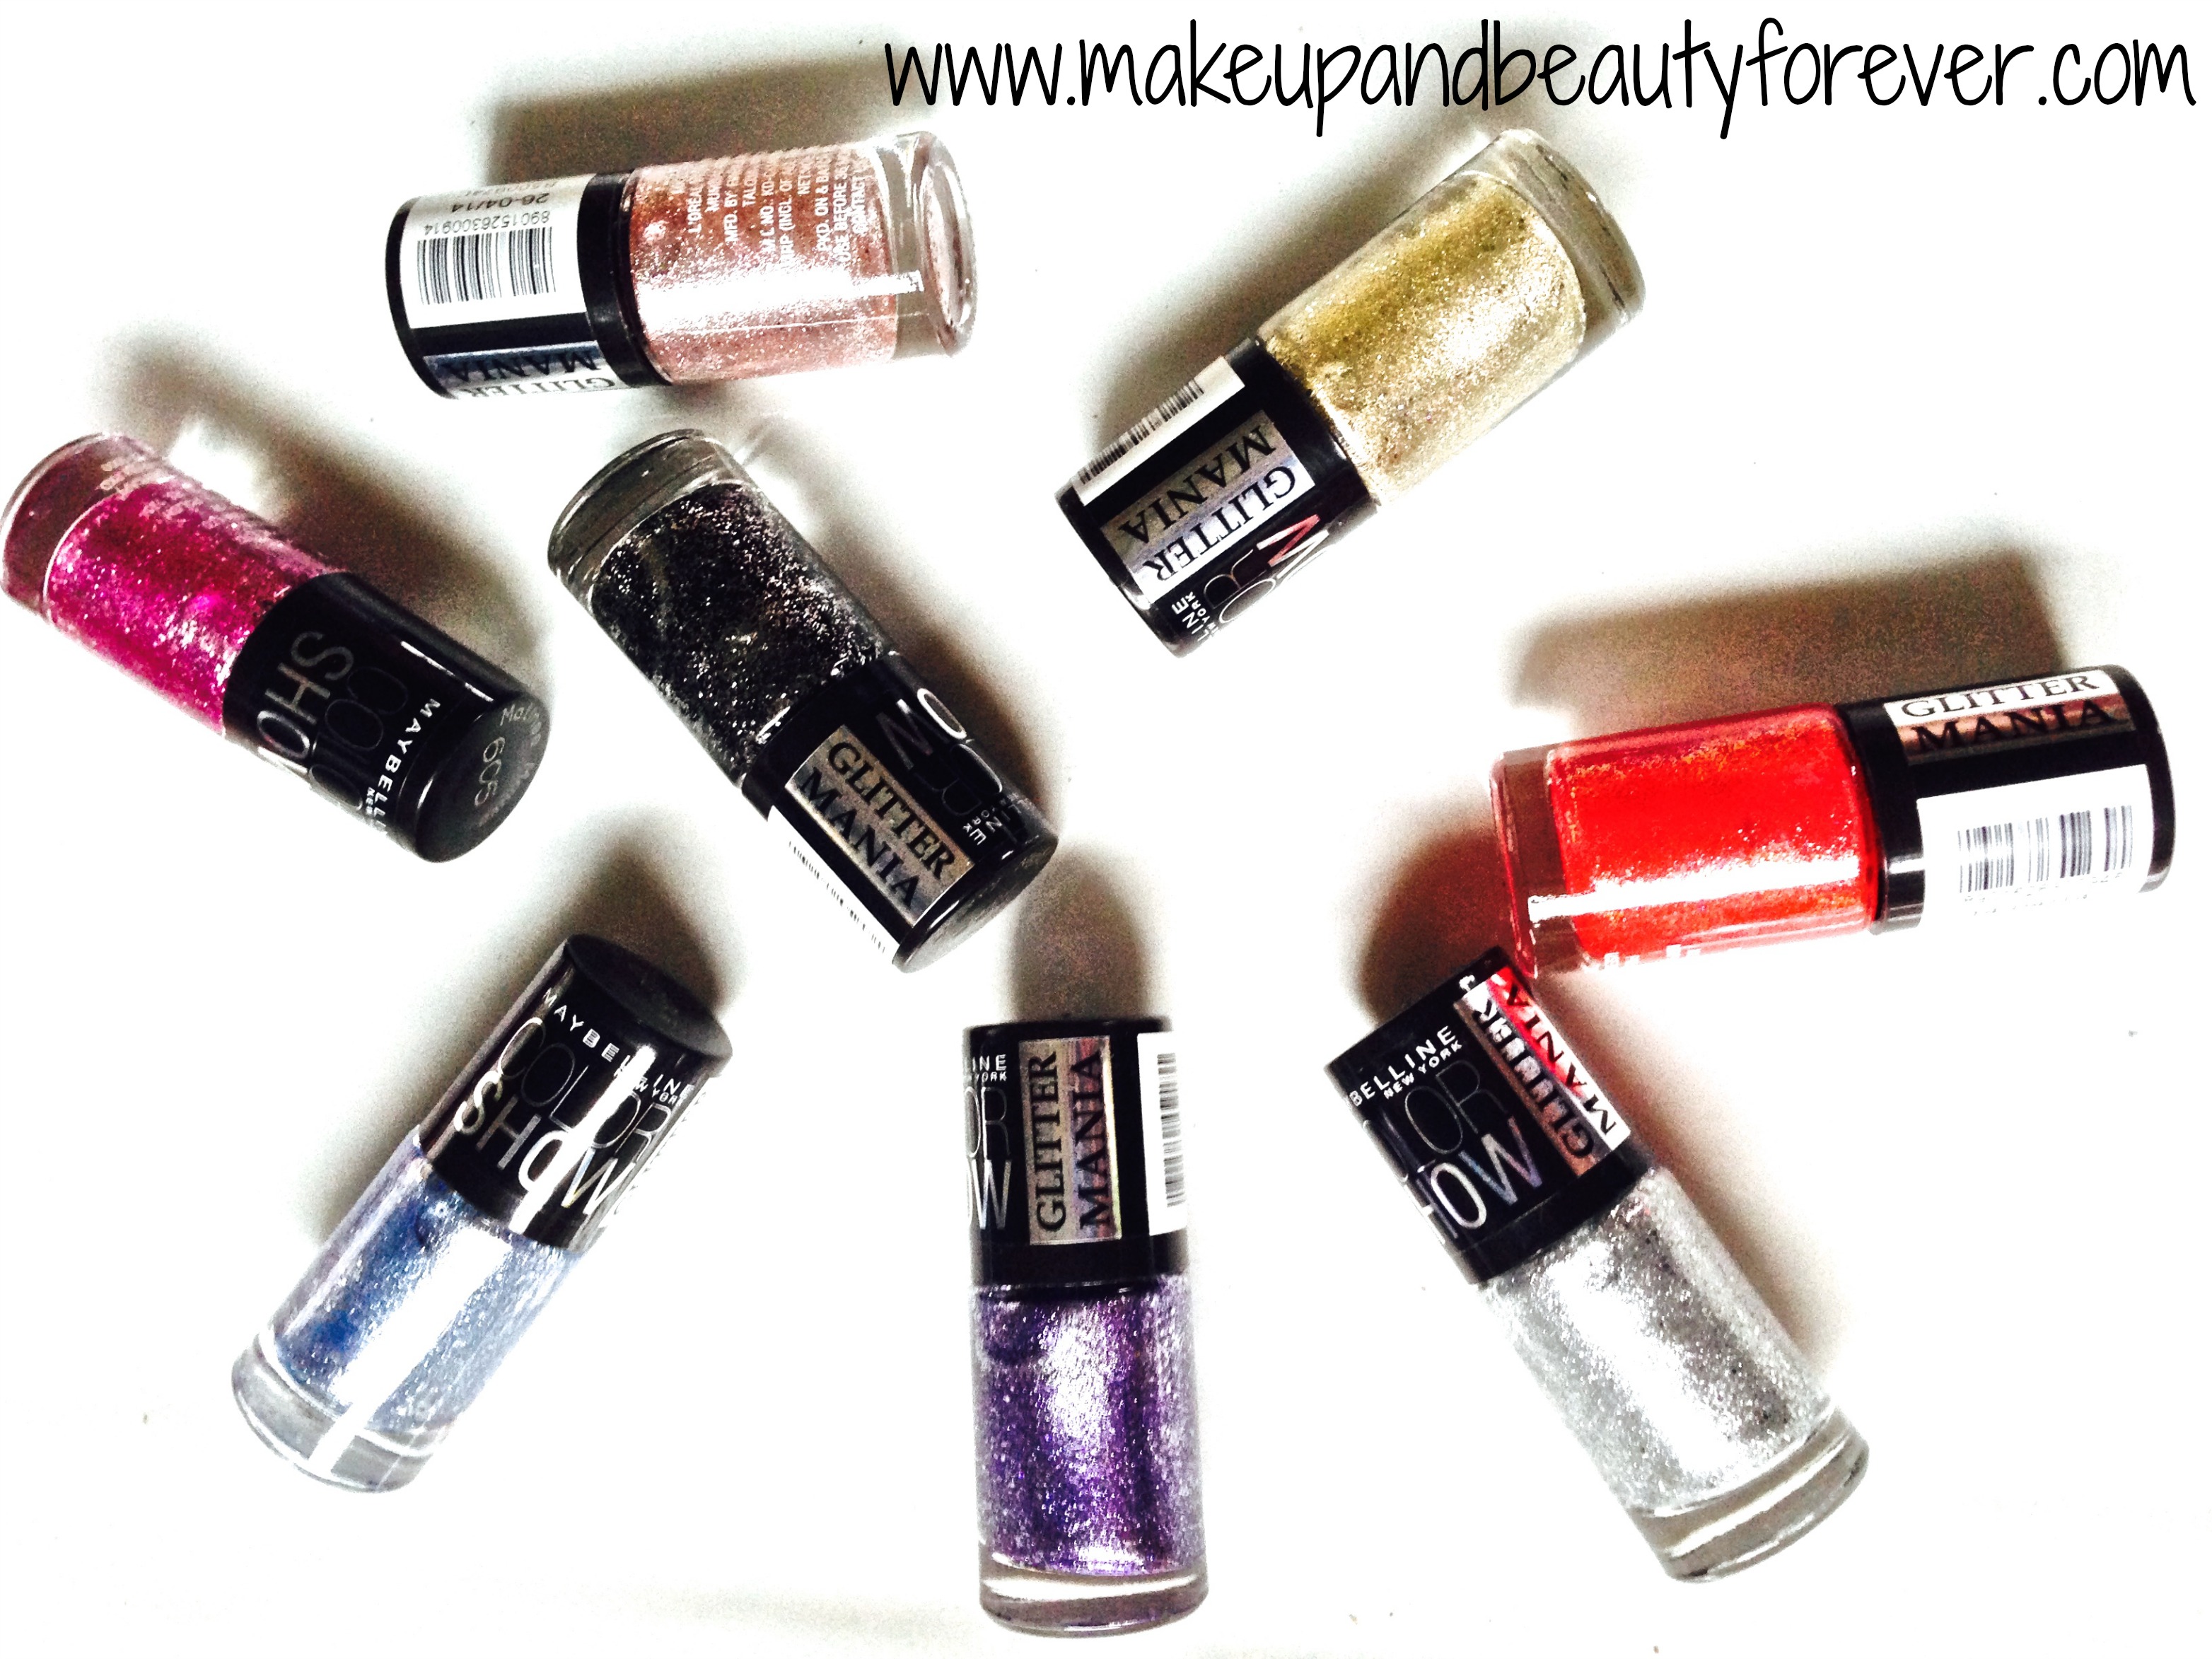 Maybelline Color Show Nail Polish in Sugar Crystals - wide 8